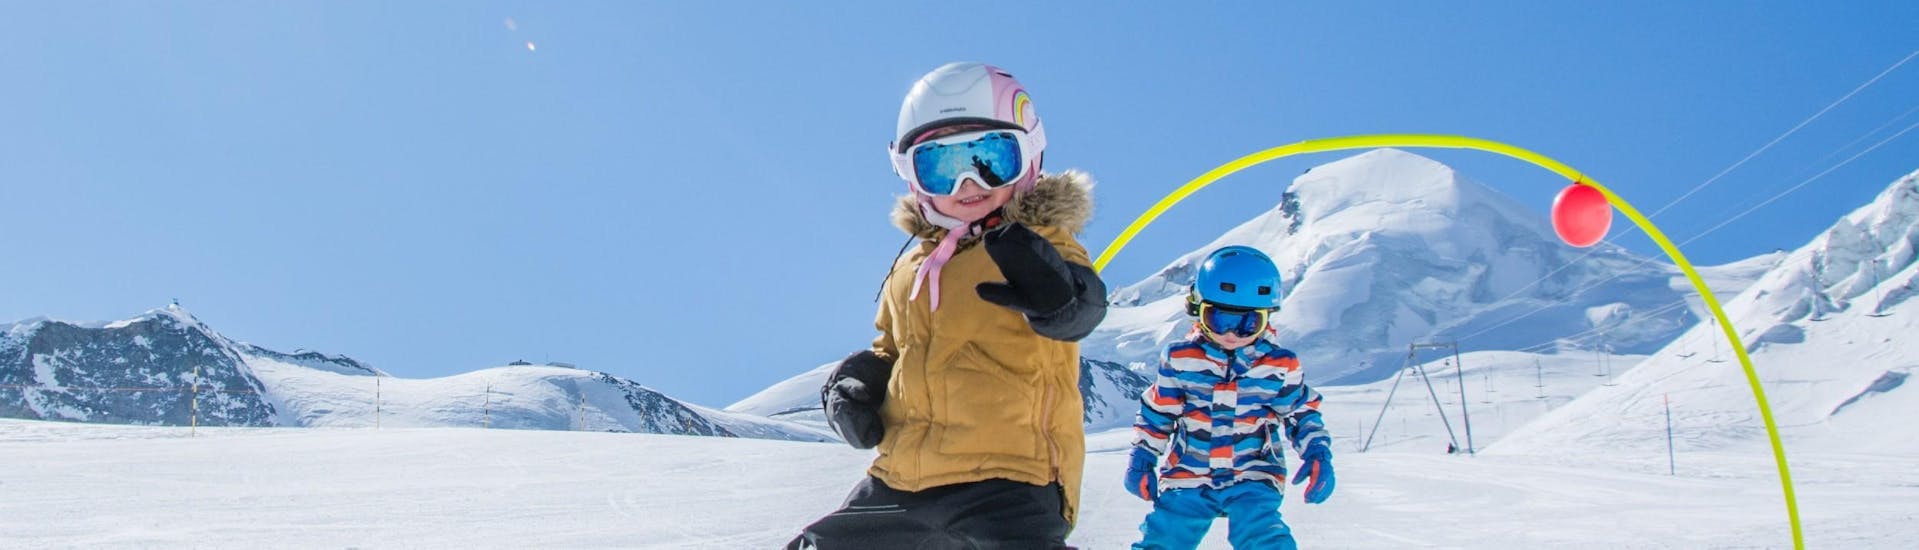 Kids Ski Lessons (from 4 y.) for All Levels with Ski School ESKIMOS Saas-Fee - Hero image